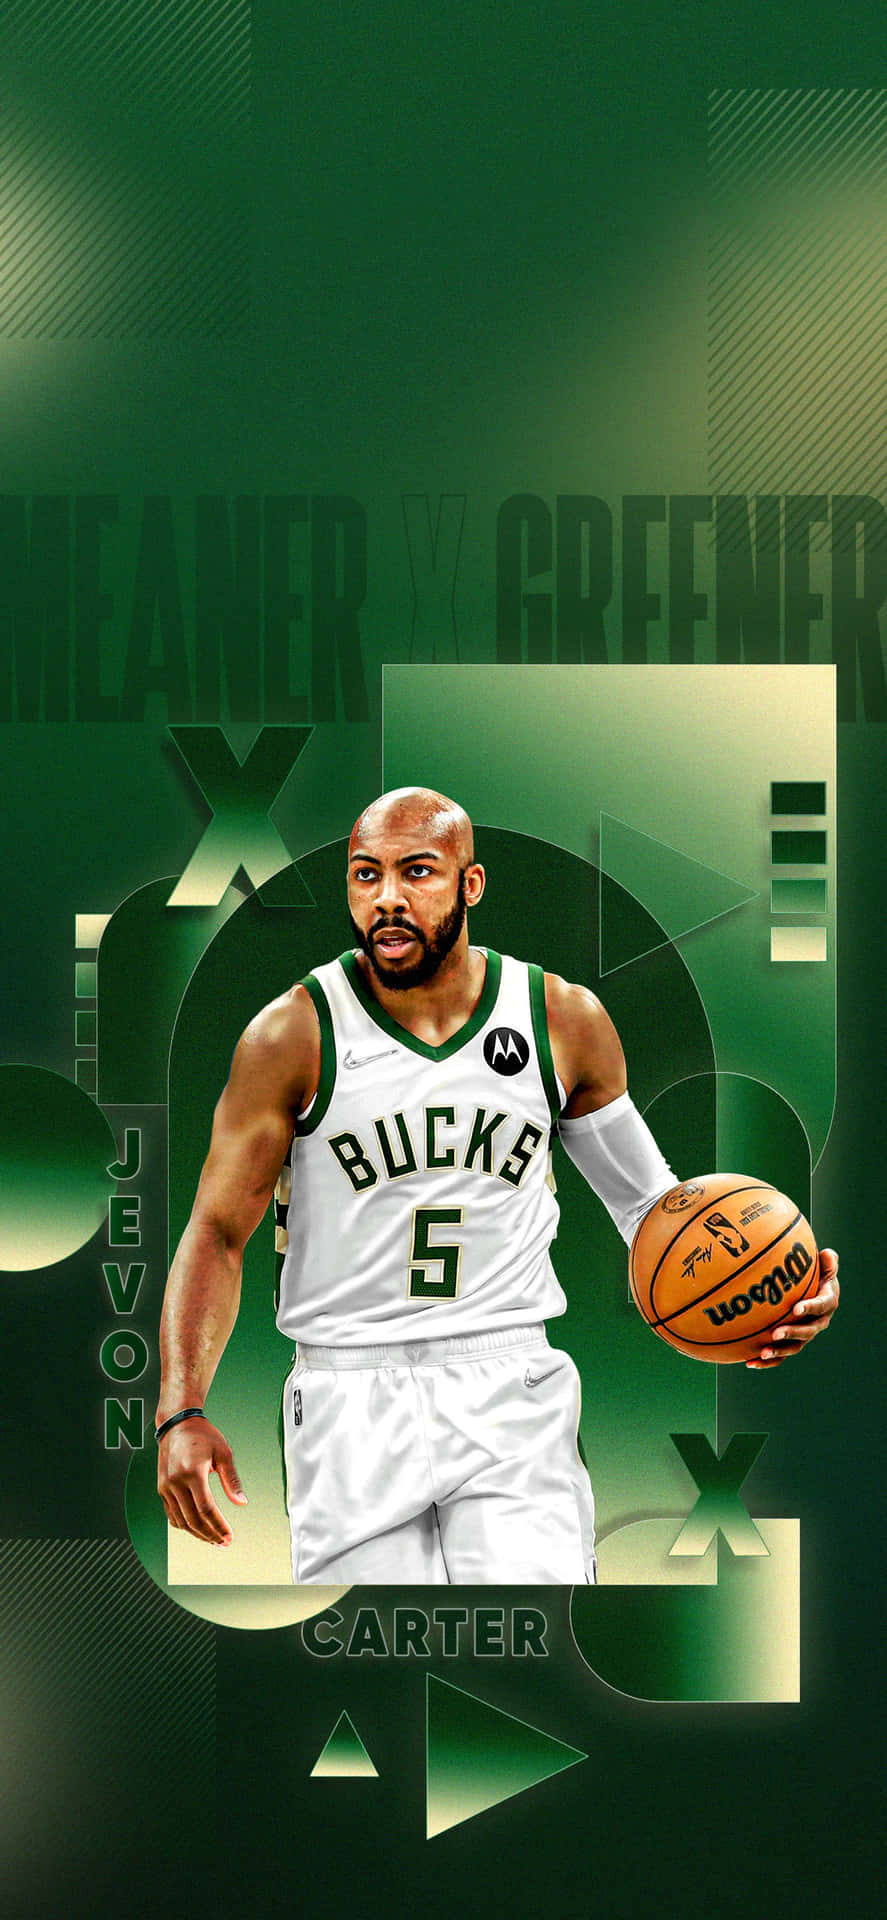 Get Ready to Catch the Bucks! Wallpaper